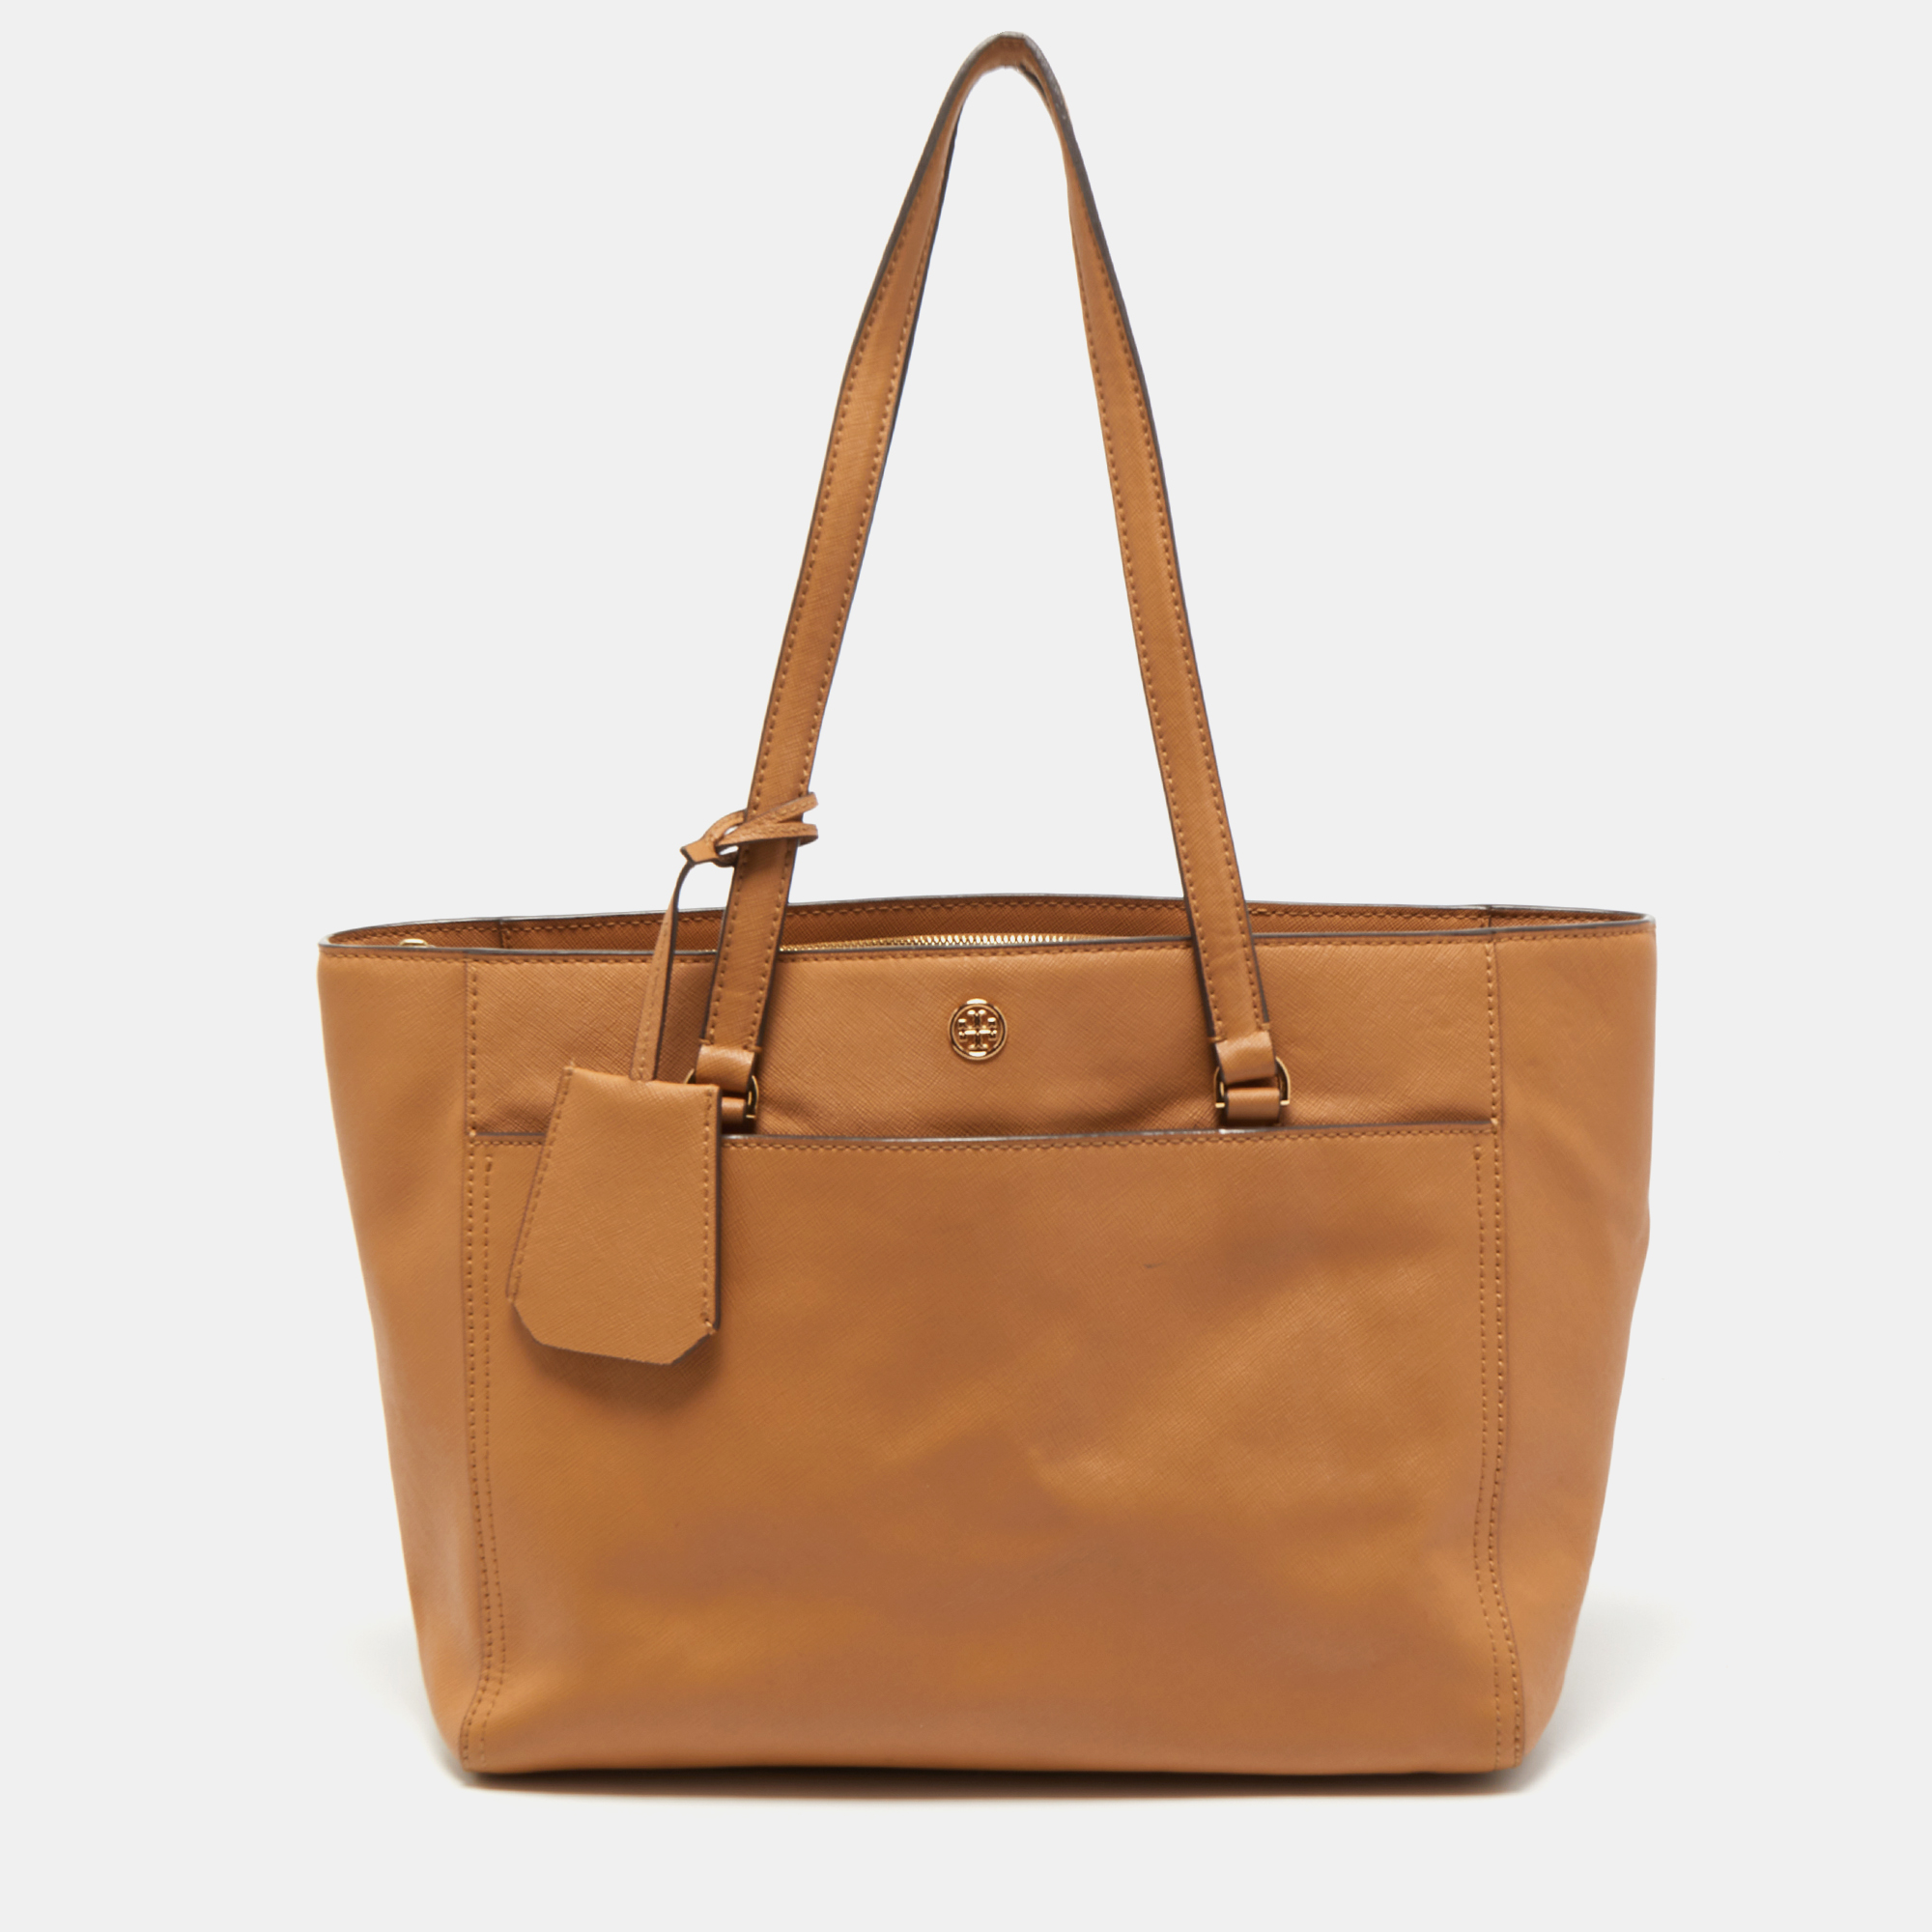 Tory Burch Tan Leather Parker Tote